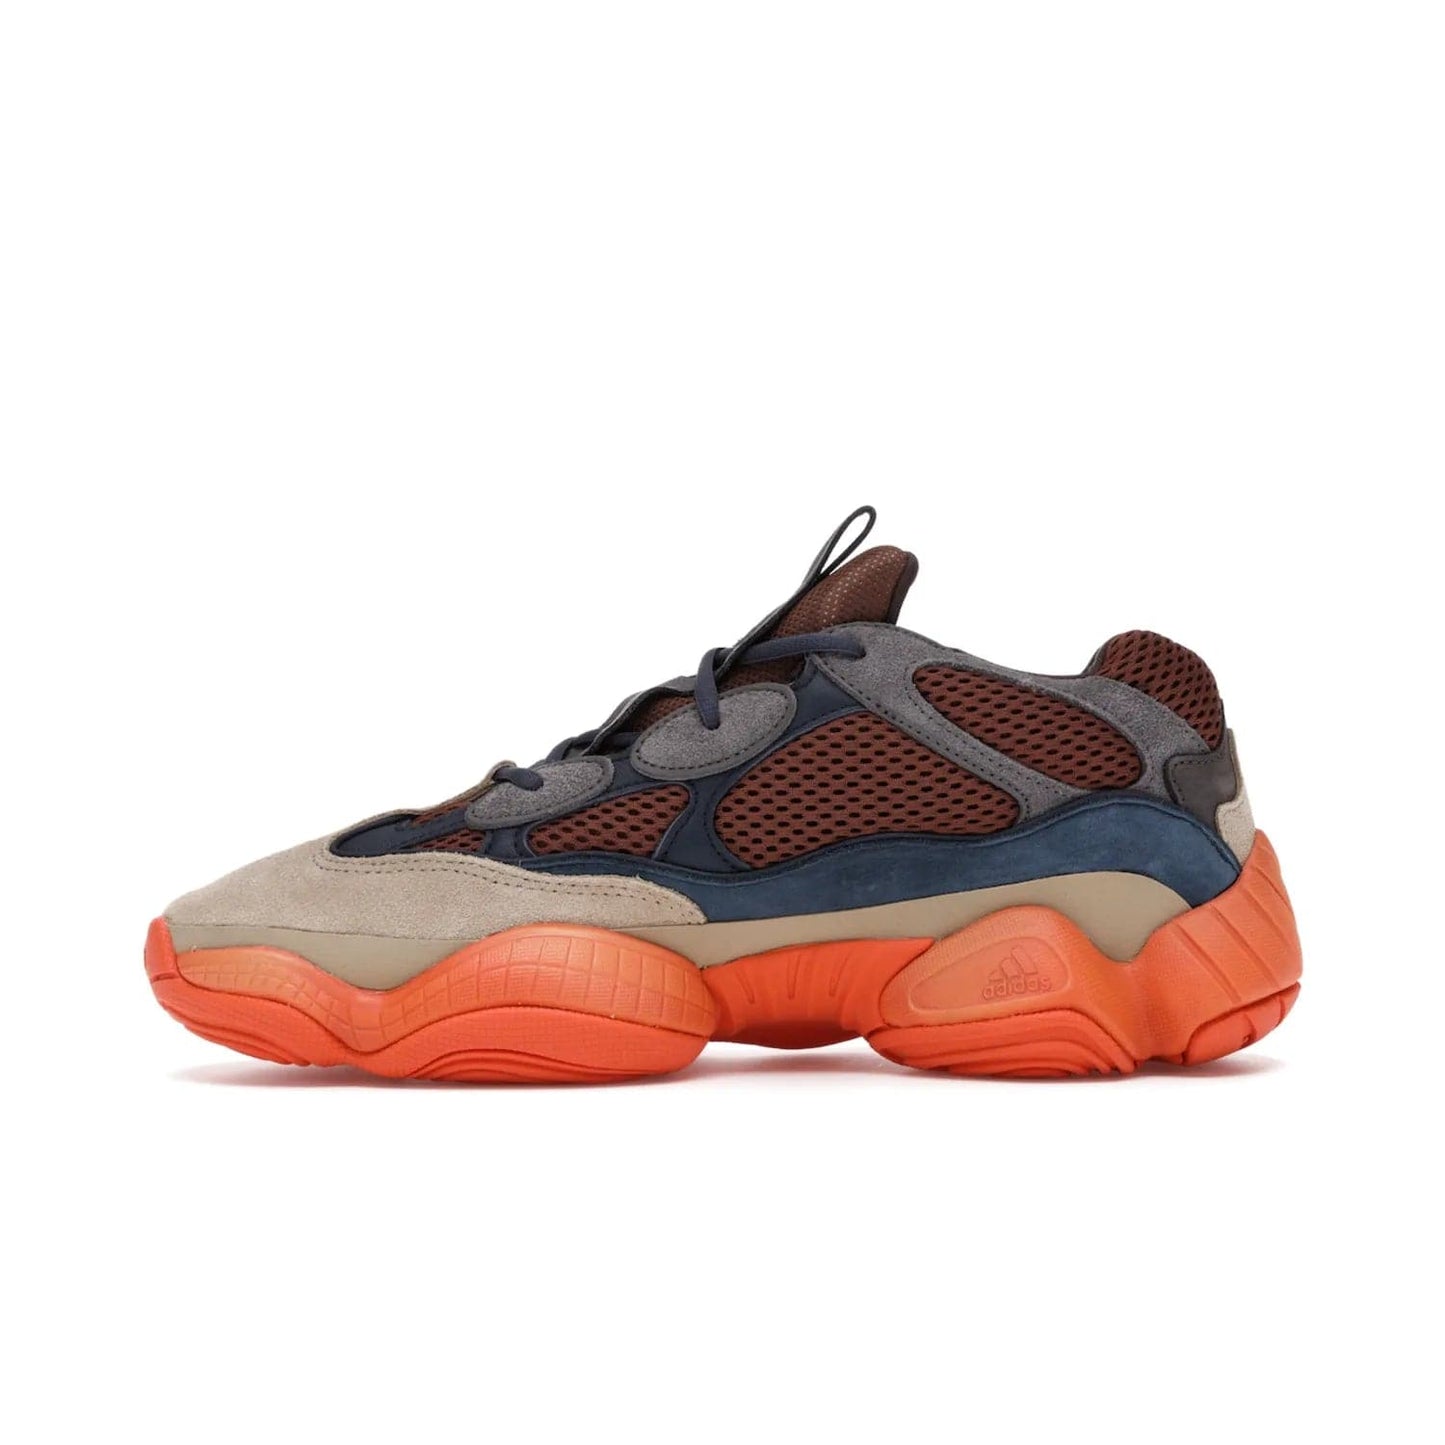 adidas Yeezy 500 Enflame - Image 19 - Only at www.BallersClubKickz.com - Step into style with the adidas Yeezy 500 Enflame. Mix of mesh, leather, and suede layered together to create tonal-brown, dark blue, & orange. Orange AdiPRENE sole provides superior cushioning & comfort. Get yours and experience maximum style.